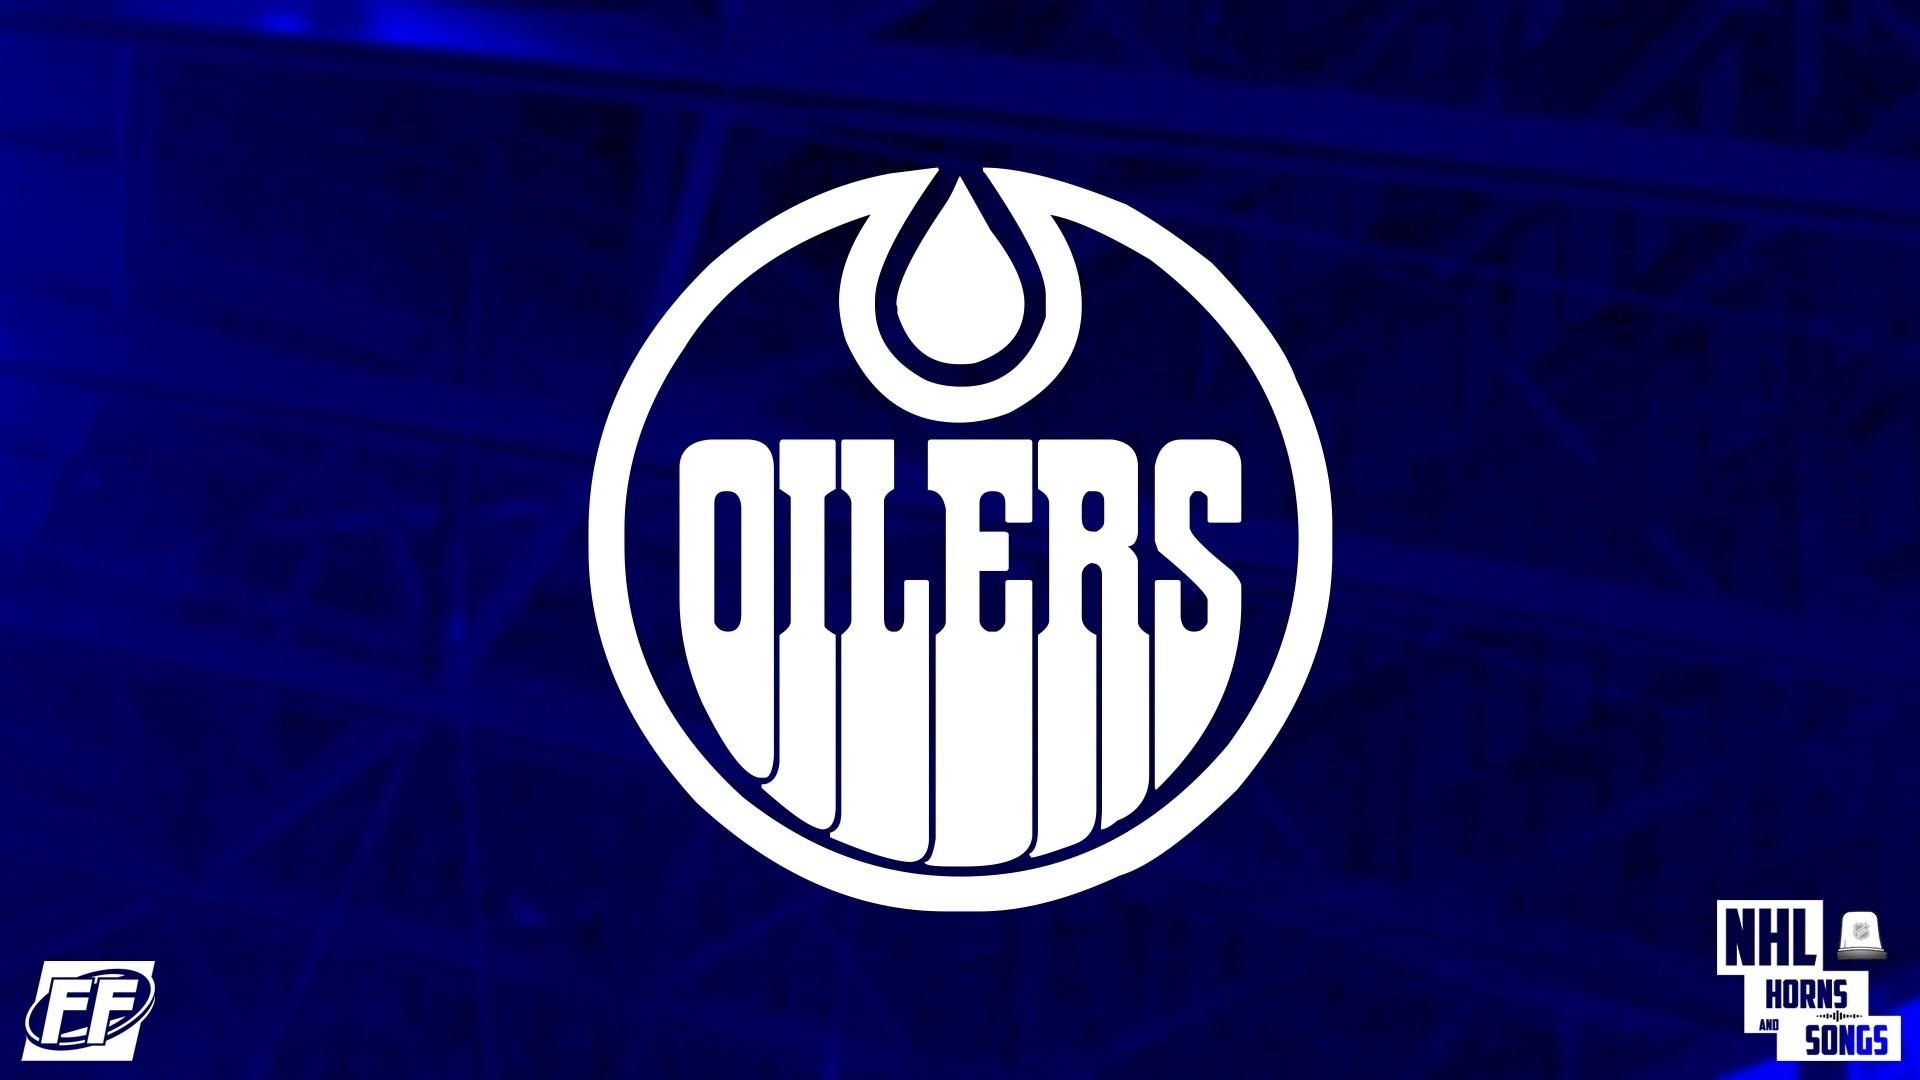 Oilers Wallpaper background picture